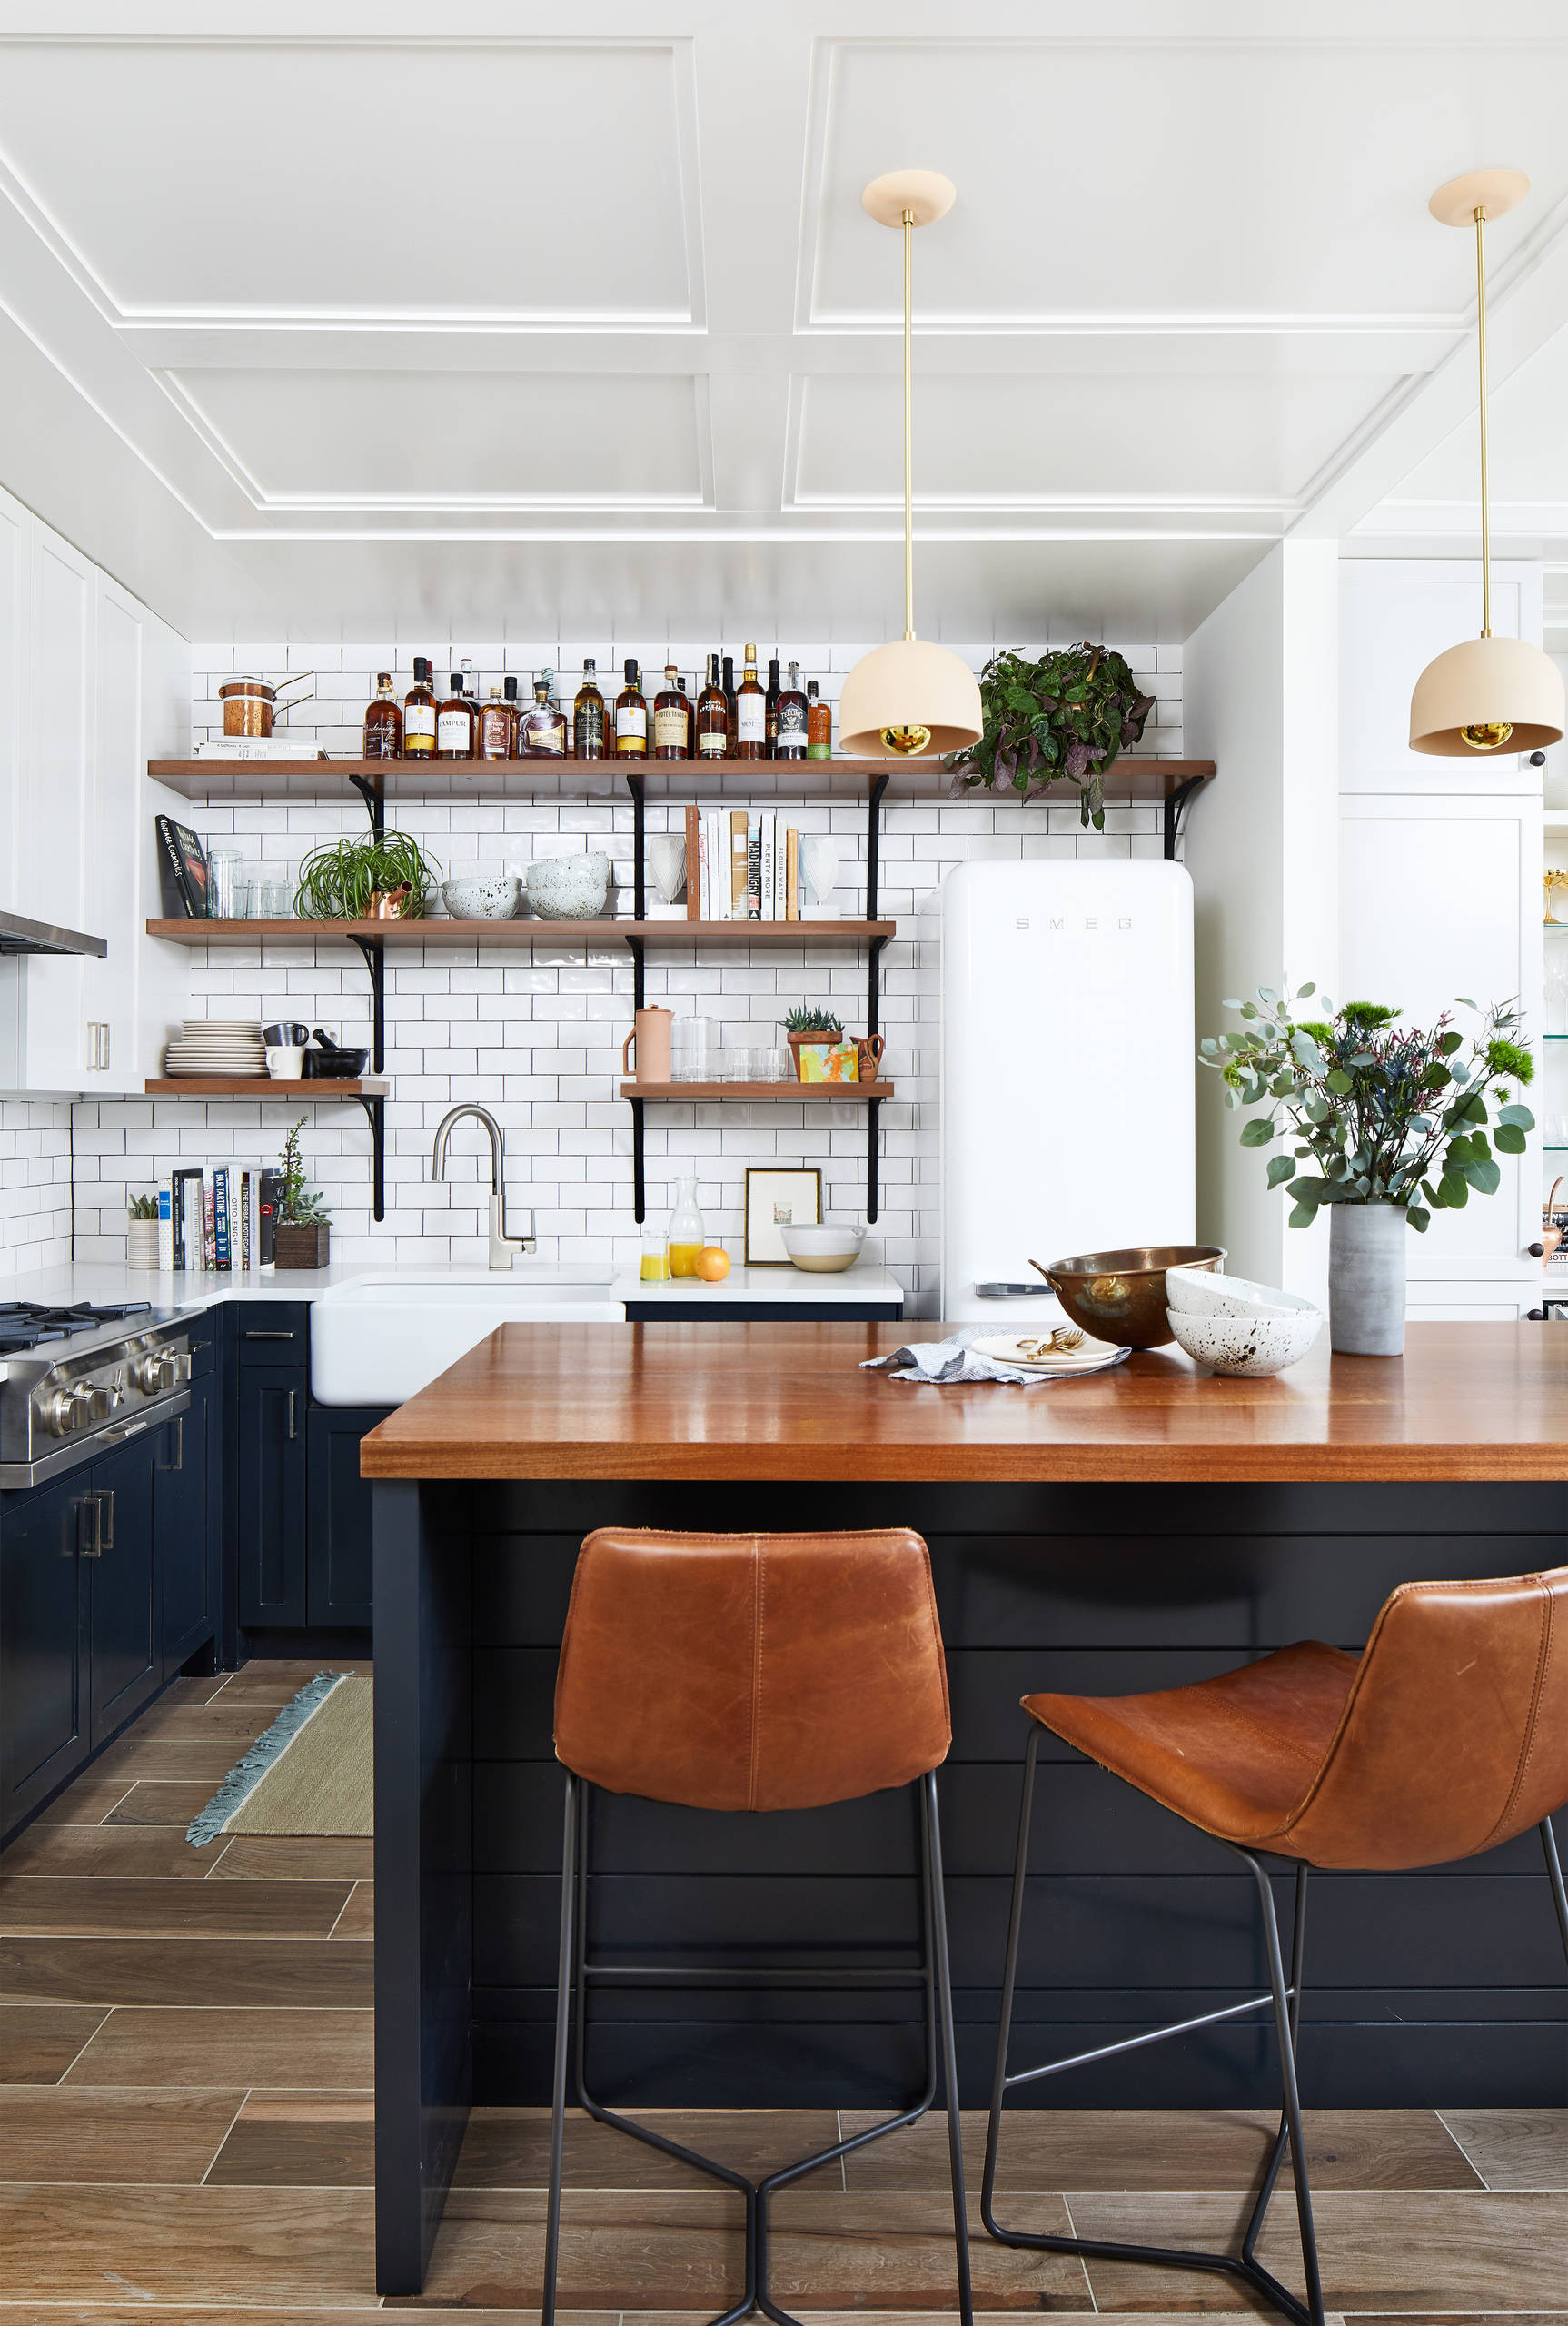 Charming open kitchen and living room designs 75 Beautiful Small Open Concept Kitchen Pictures Ideas July 2021 Houzz